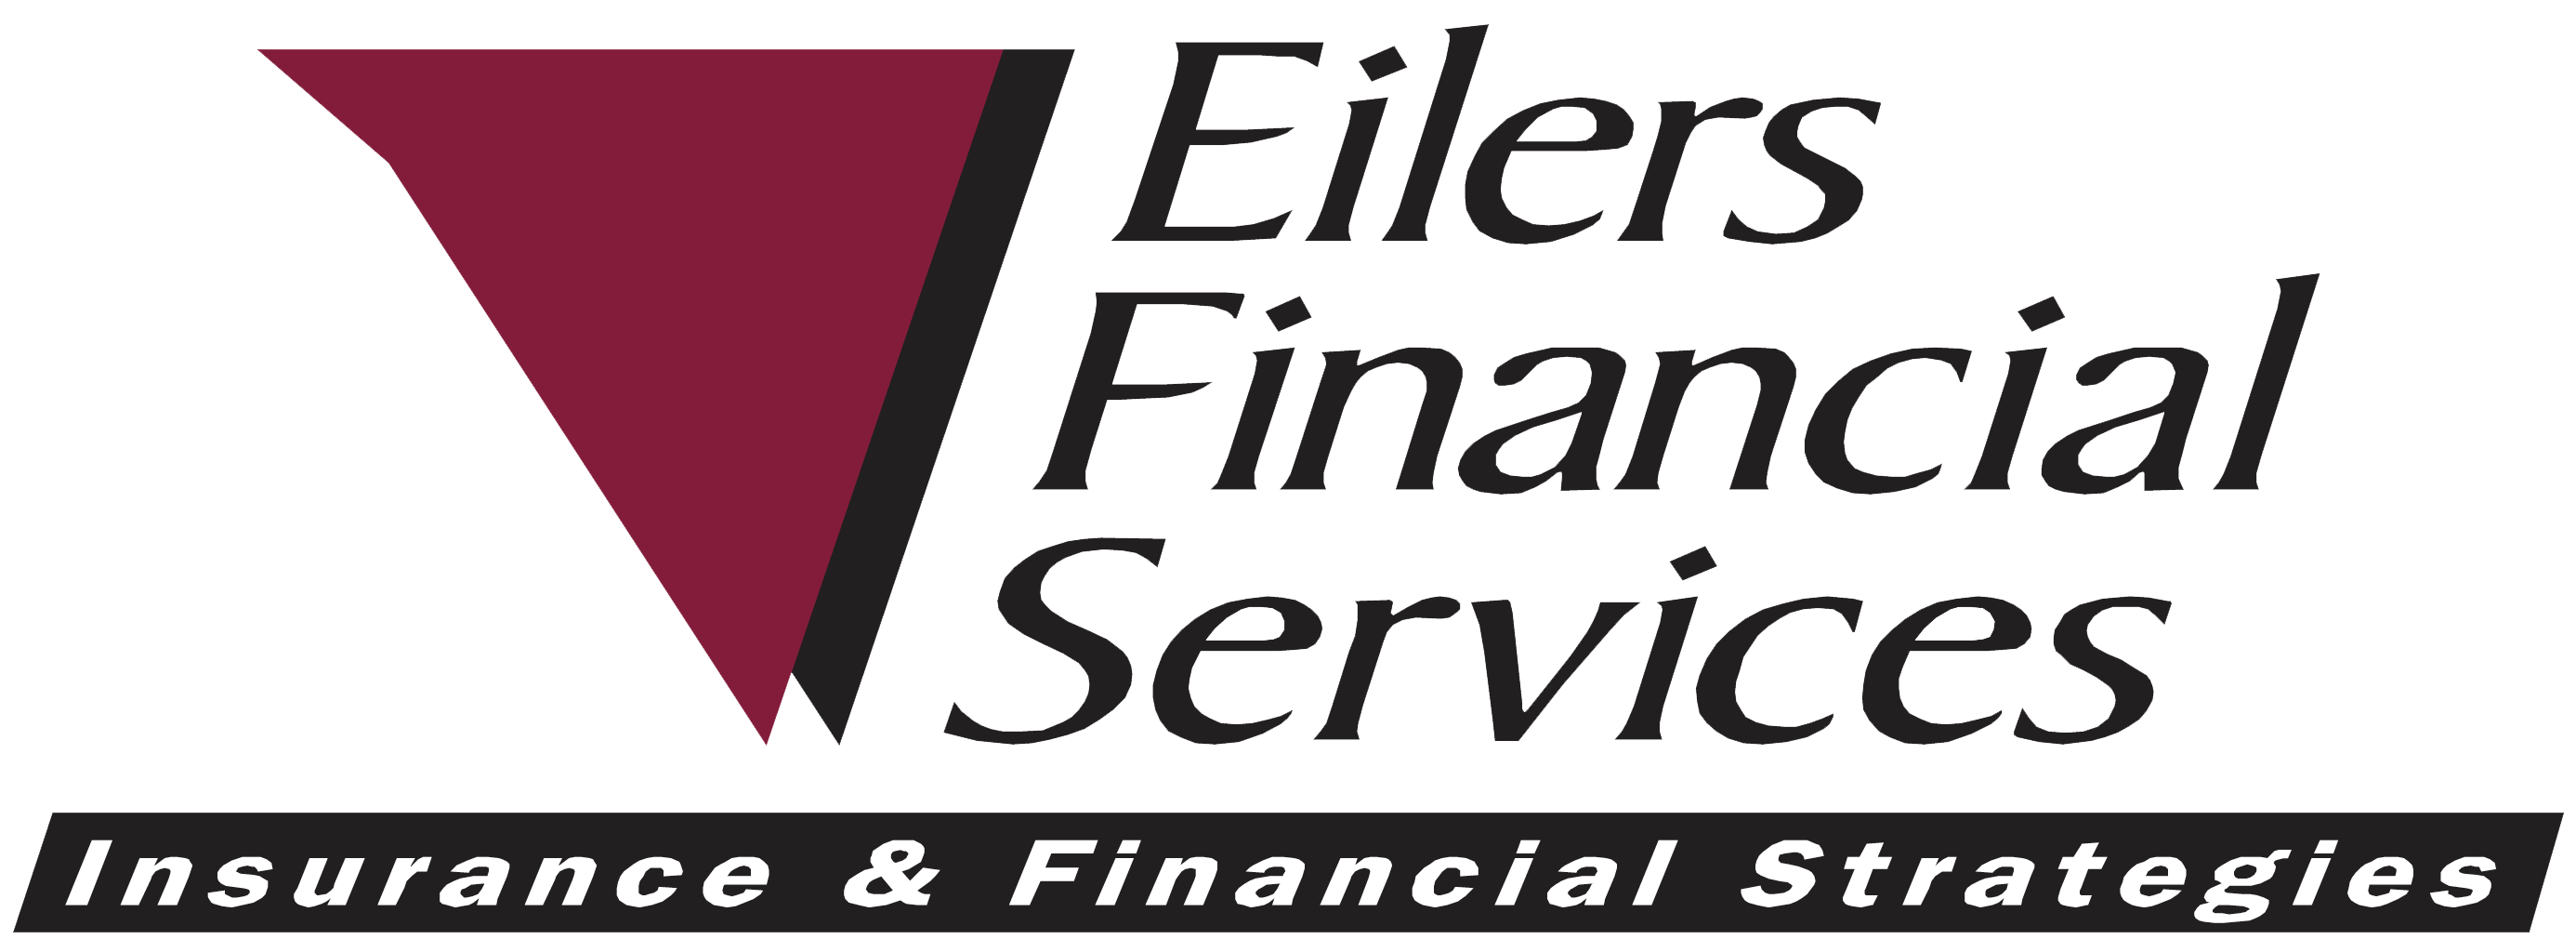 Eilers Financial Services